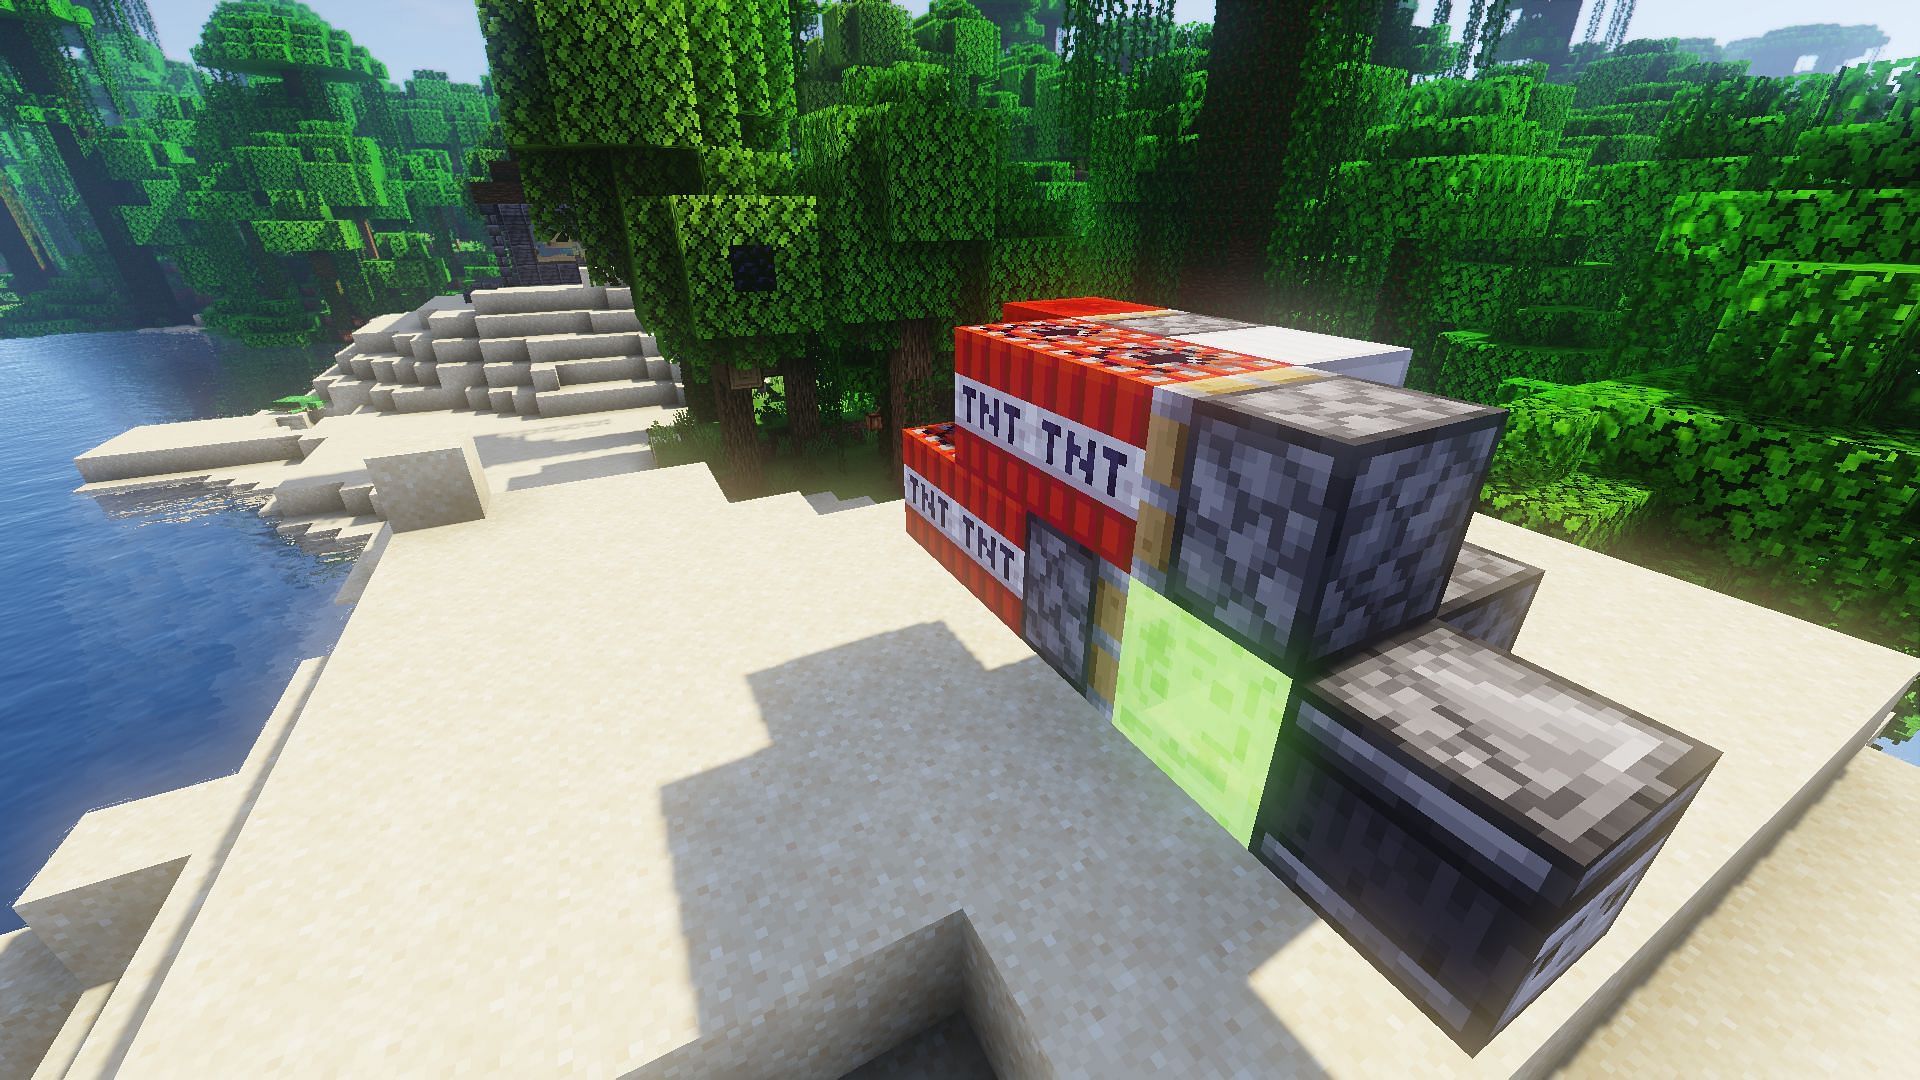 The Redstone Missile ready to launch at its obsidian target (Image via Minecraft)